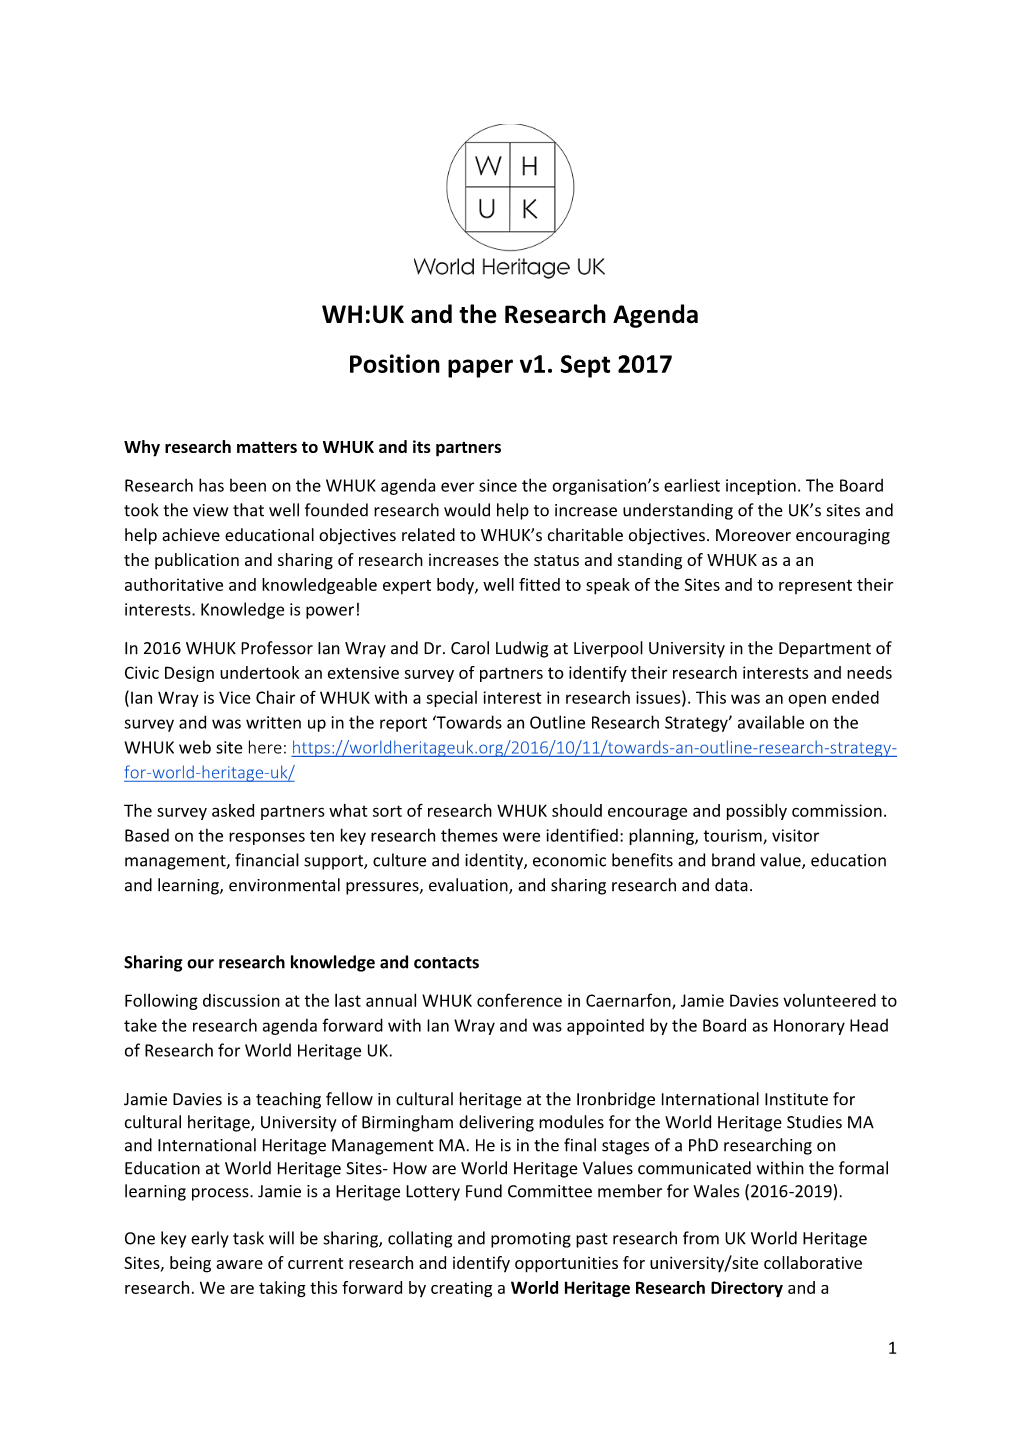 WH:UK and the Research Agenda Position Paper V1. Sept 2017